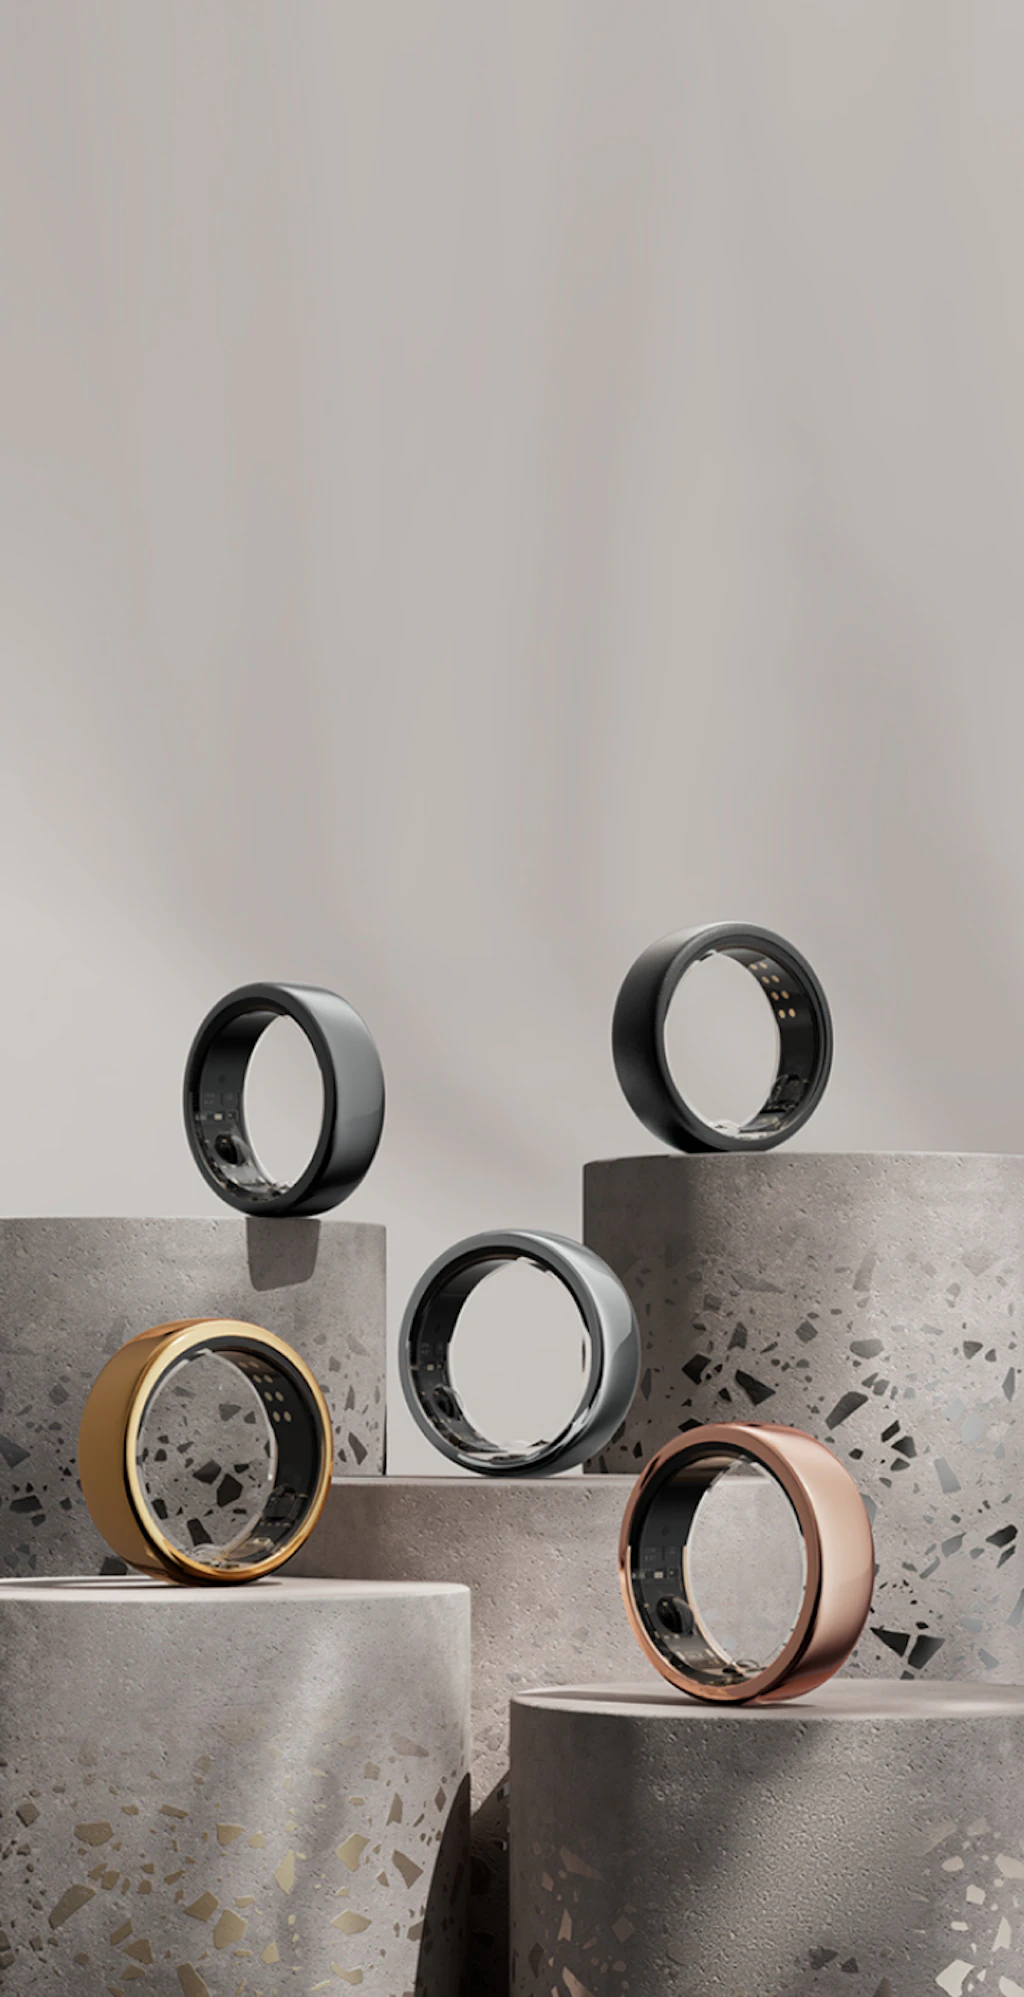 invadir inferencia No quiero Oura Ring. Smart Ring for Fitness, Stress, Sleep & Health.